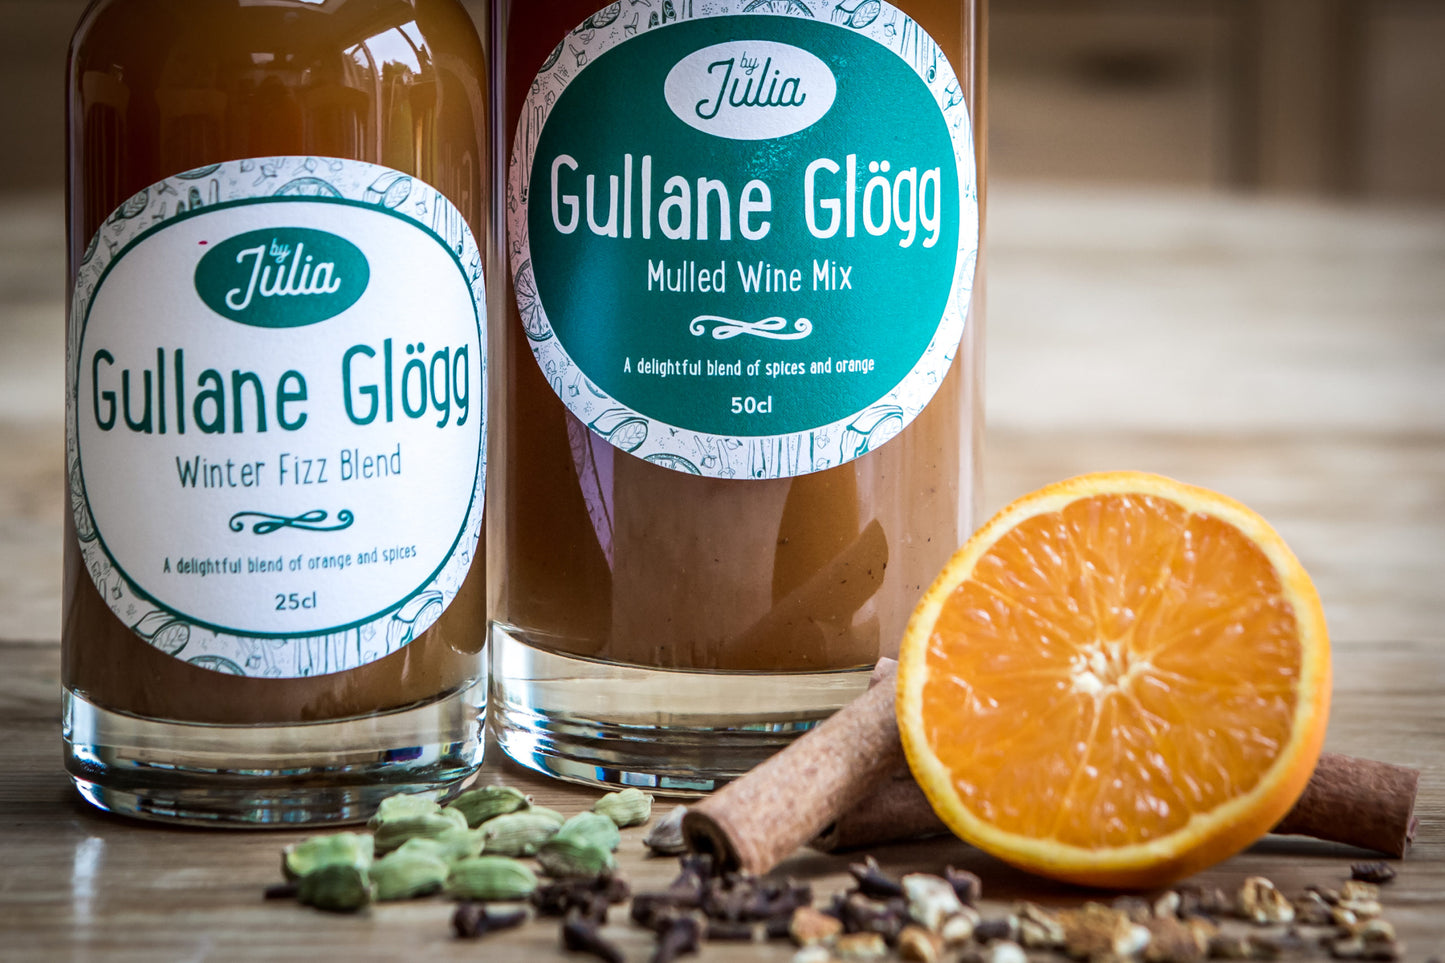 Gullane Glögg Mulled Wine Mix and Winter Fizz Blend bottles in close up with orange and cinnamon sticks